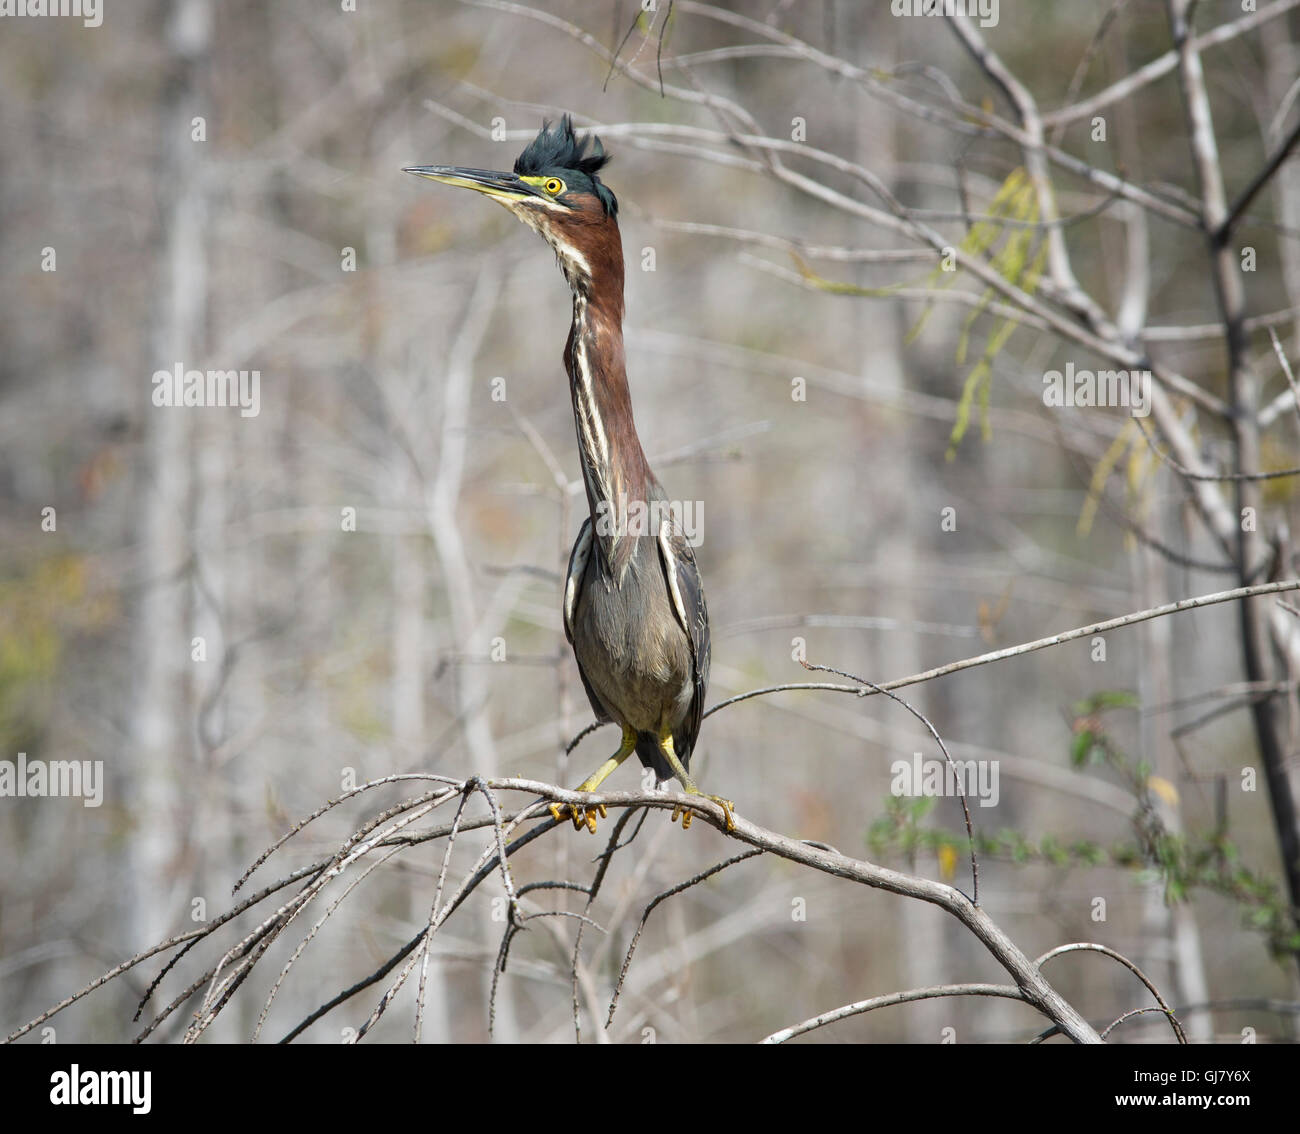 Green Heron perched on  cypress tree branch catches morning light revealing its lovely jewel like iridescence against muted gray Stock Photo